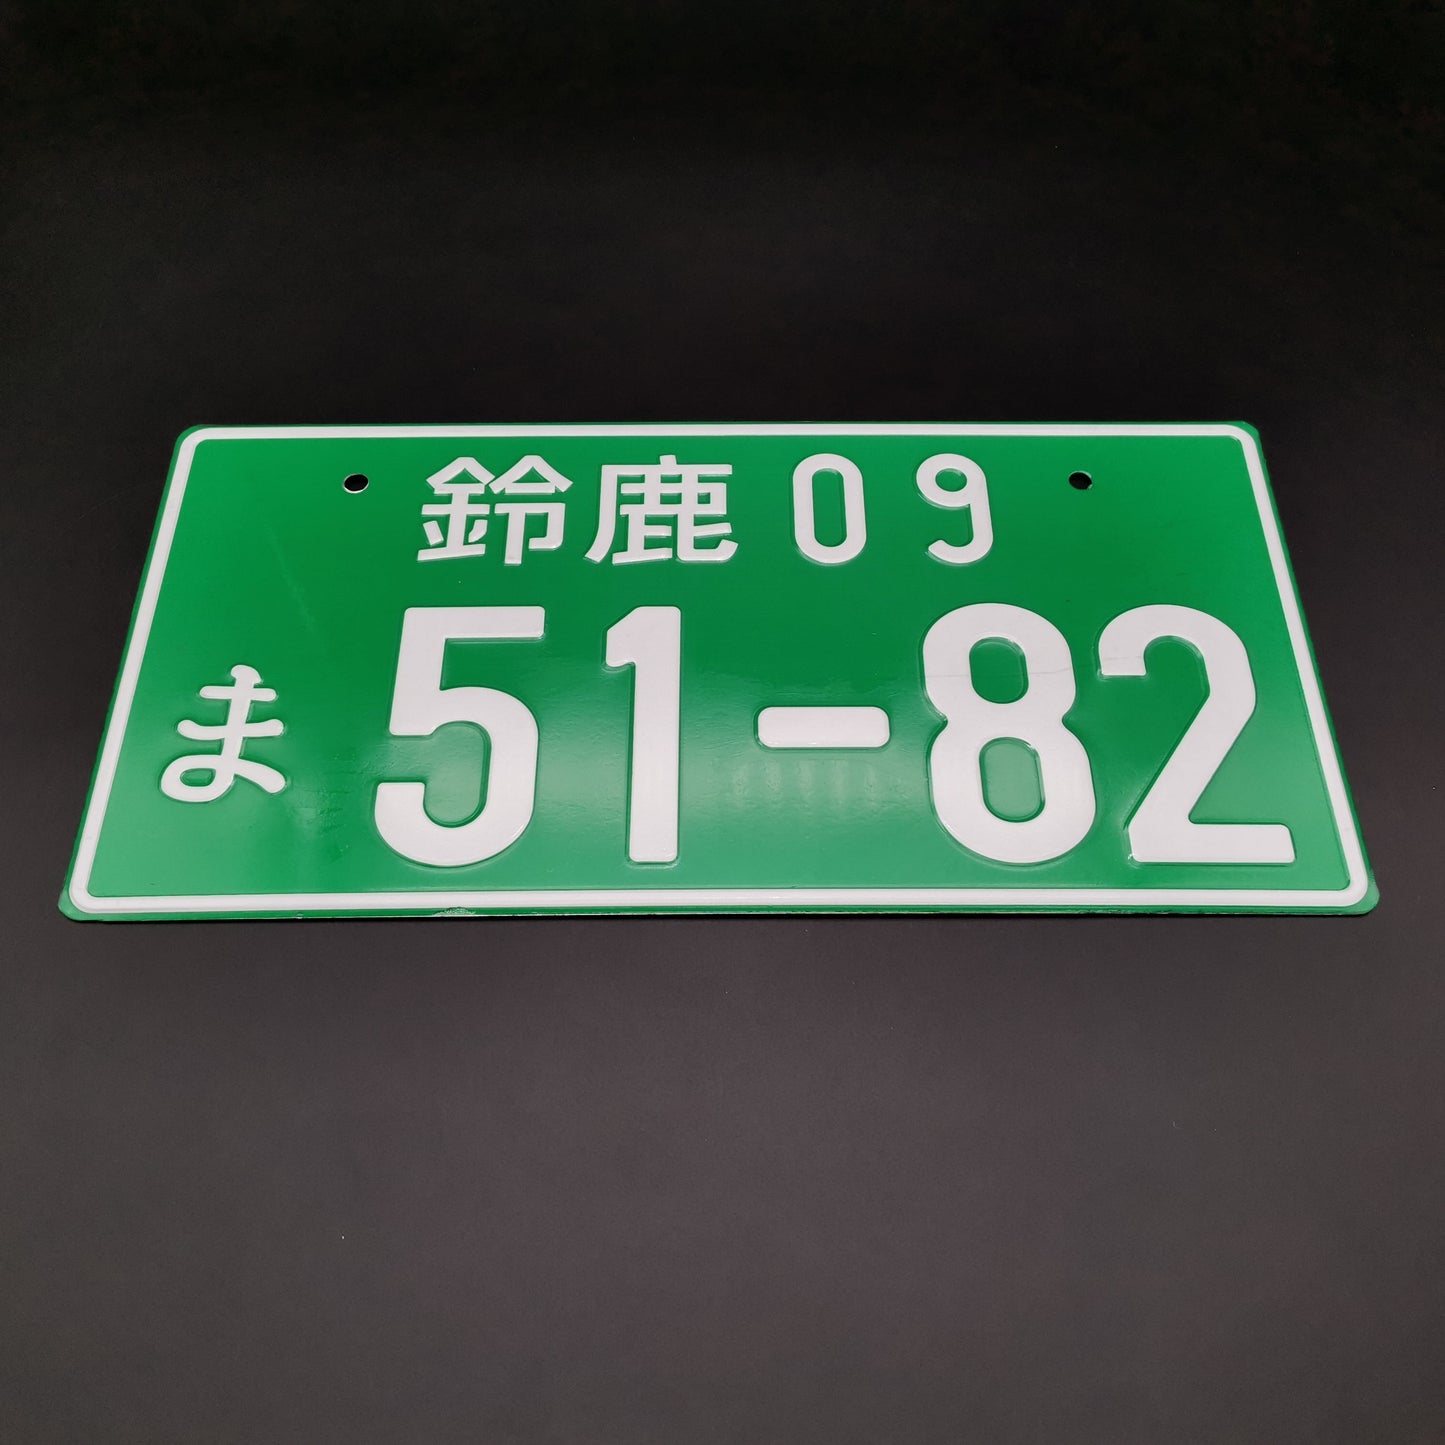 JDM inspired number plates